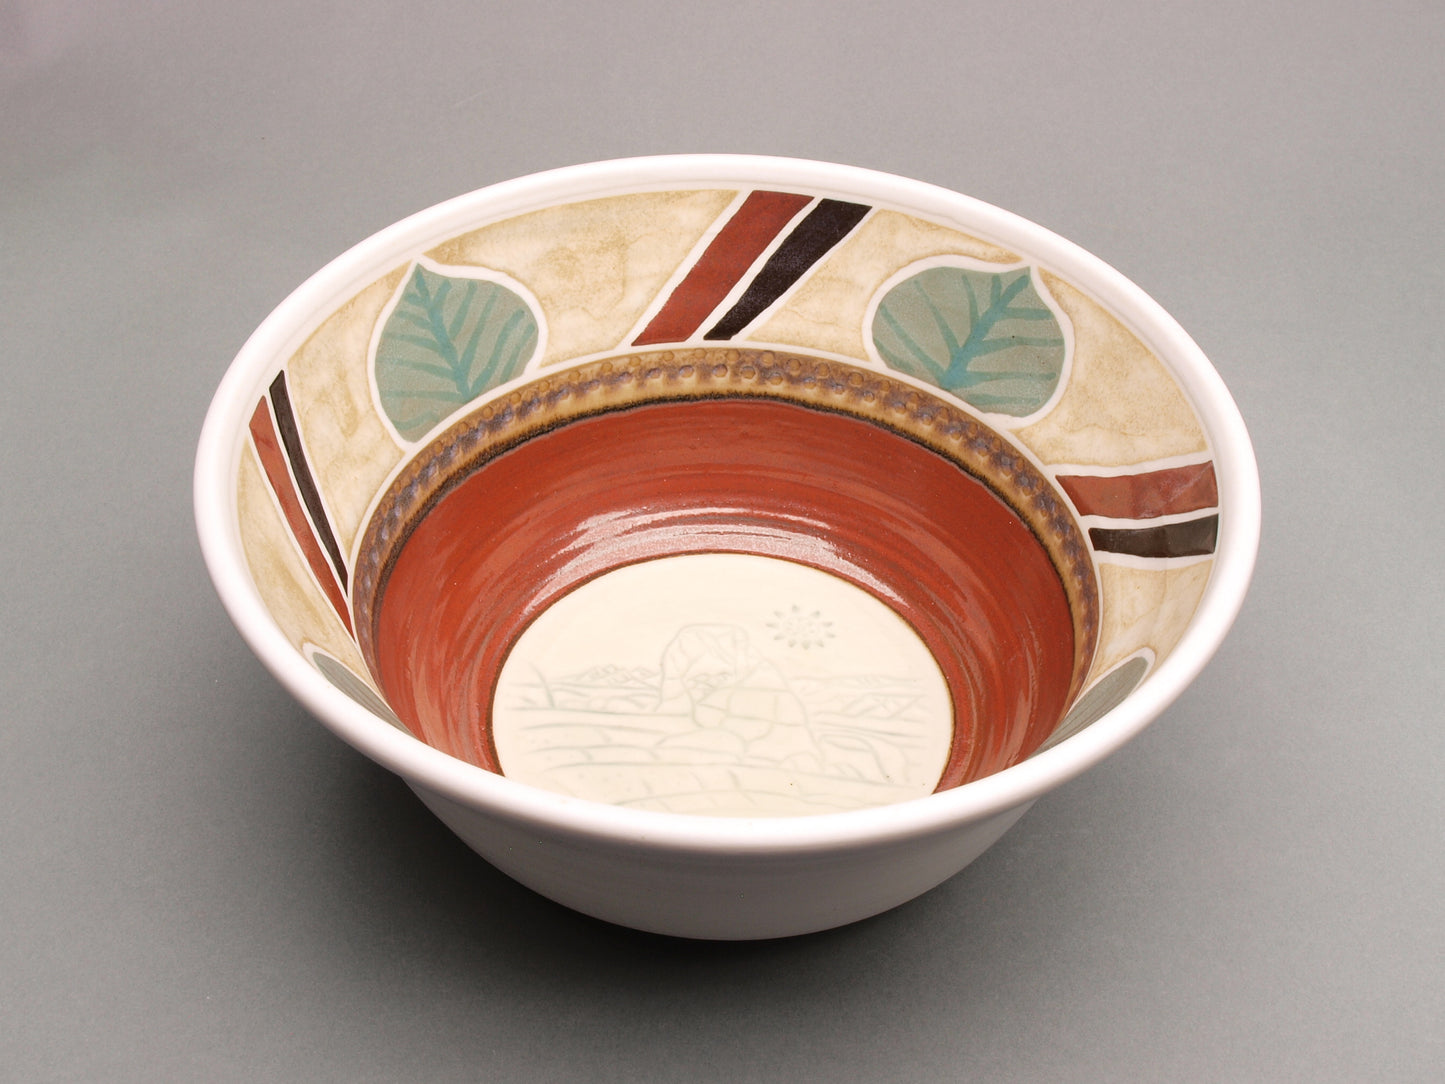 Porcelain Ceramic Bowl with a  Delicate Arch imprint, 9.25" dia. 4" tall